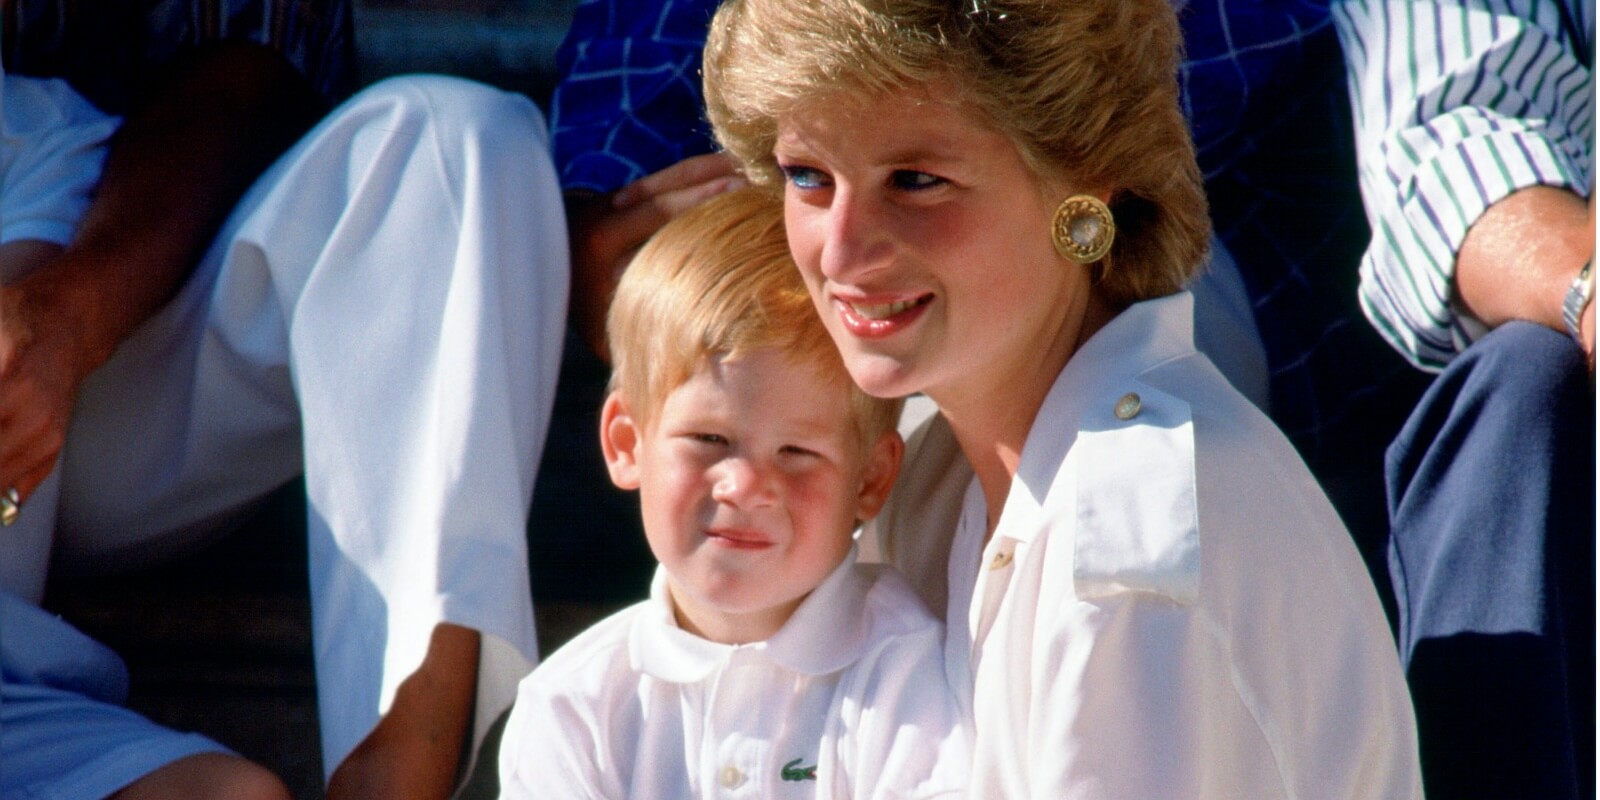 Prince harry sits on his mother' Princess Diana's lap, during a photocall with King Charles and Prince William.